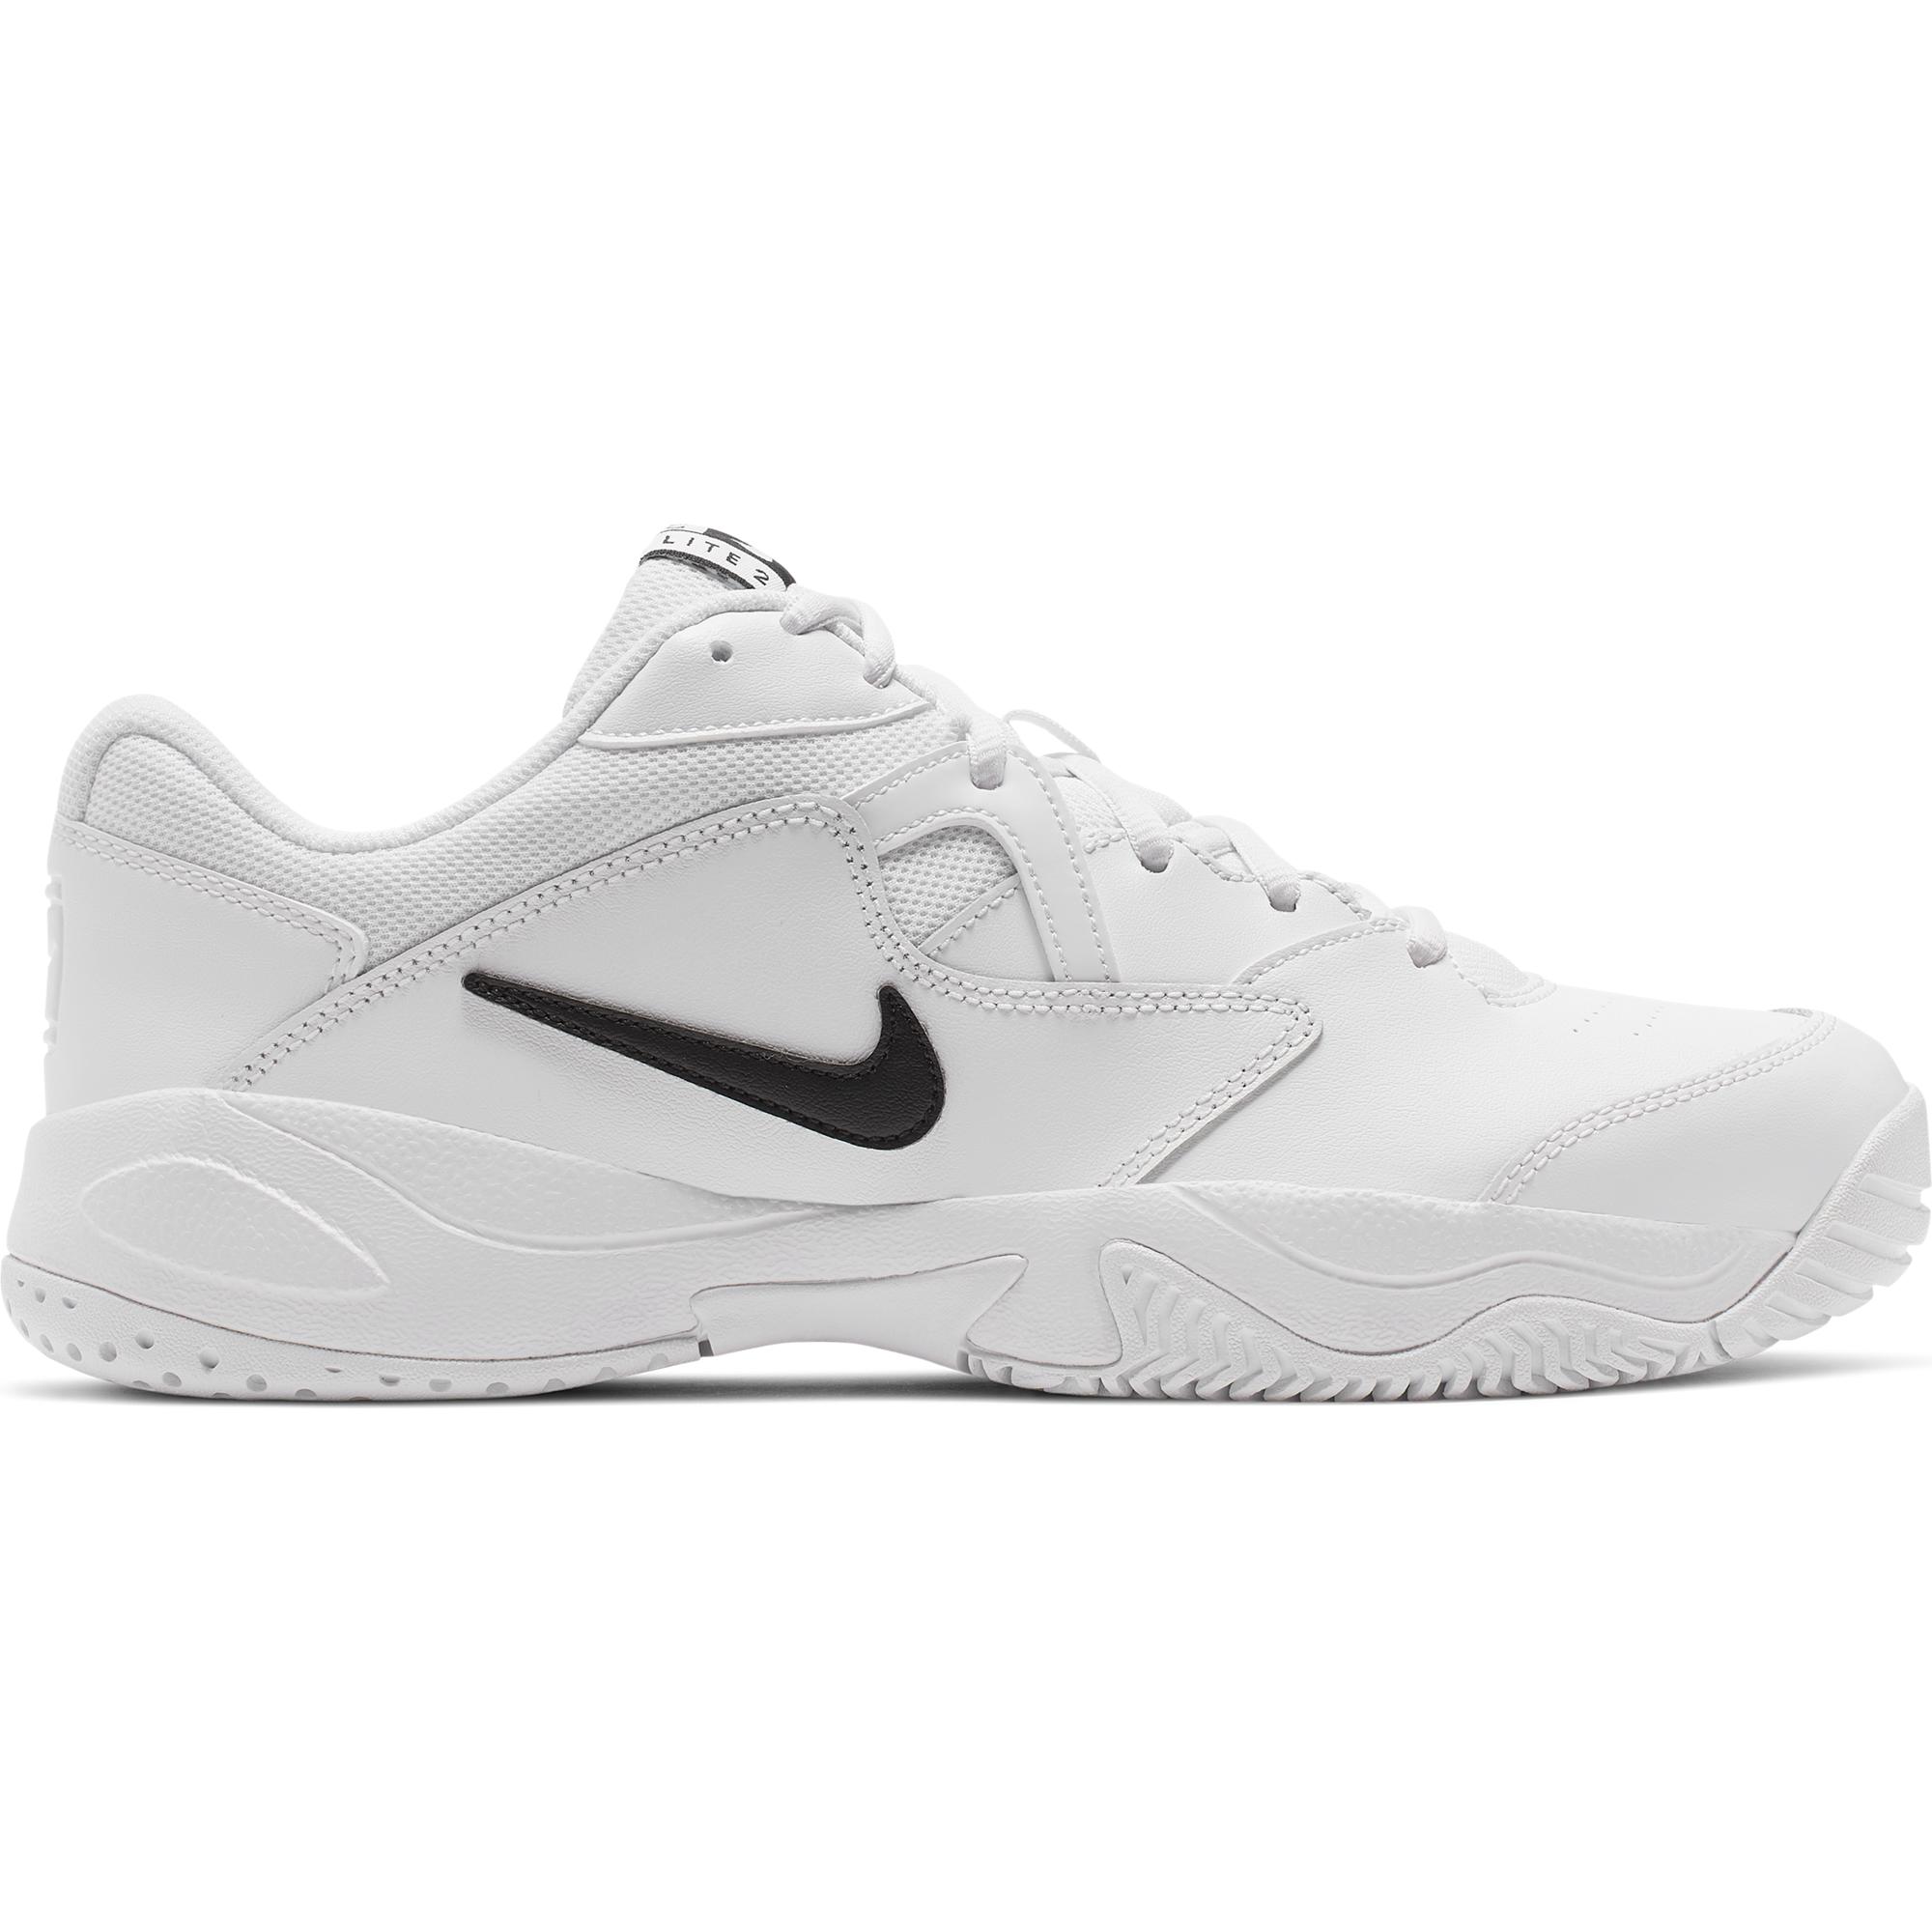 nike court royale mujer decathlon 1682a4